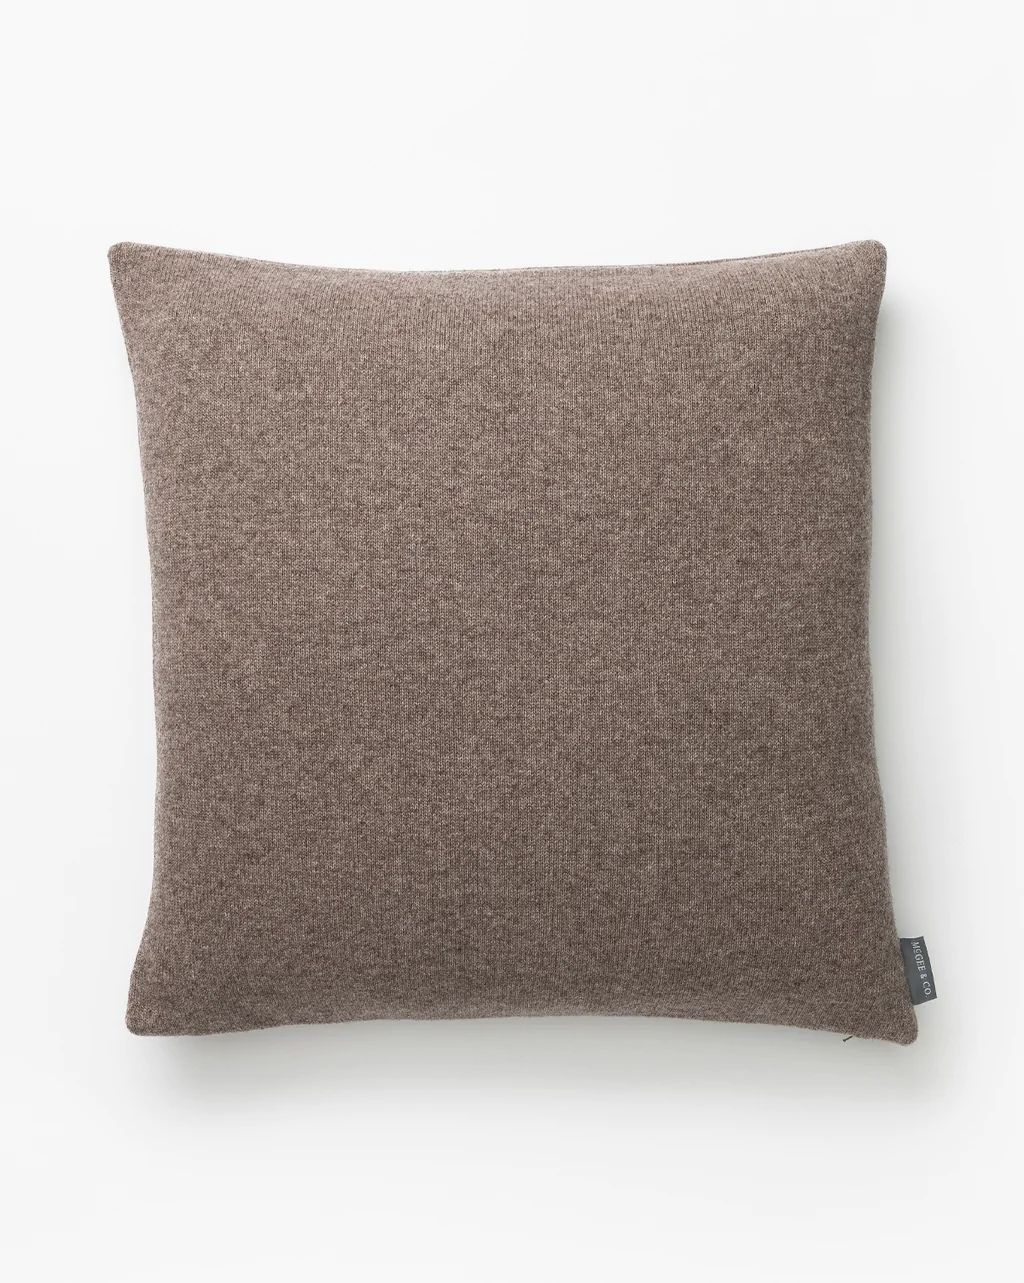 Evelyn Knitted Sweater Pillow Cover | McGee & Co.